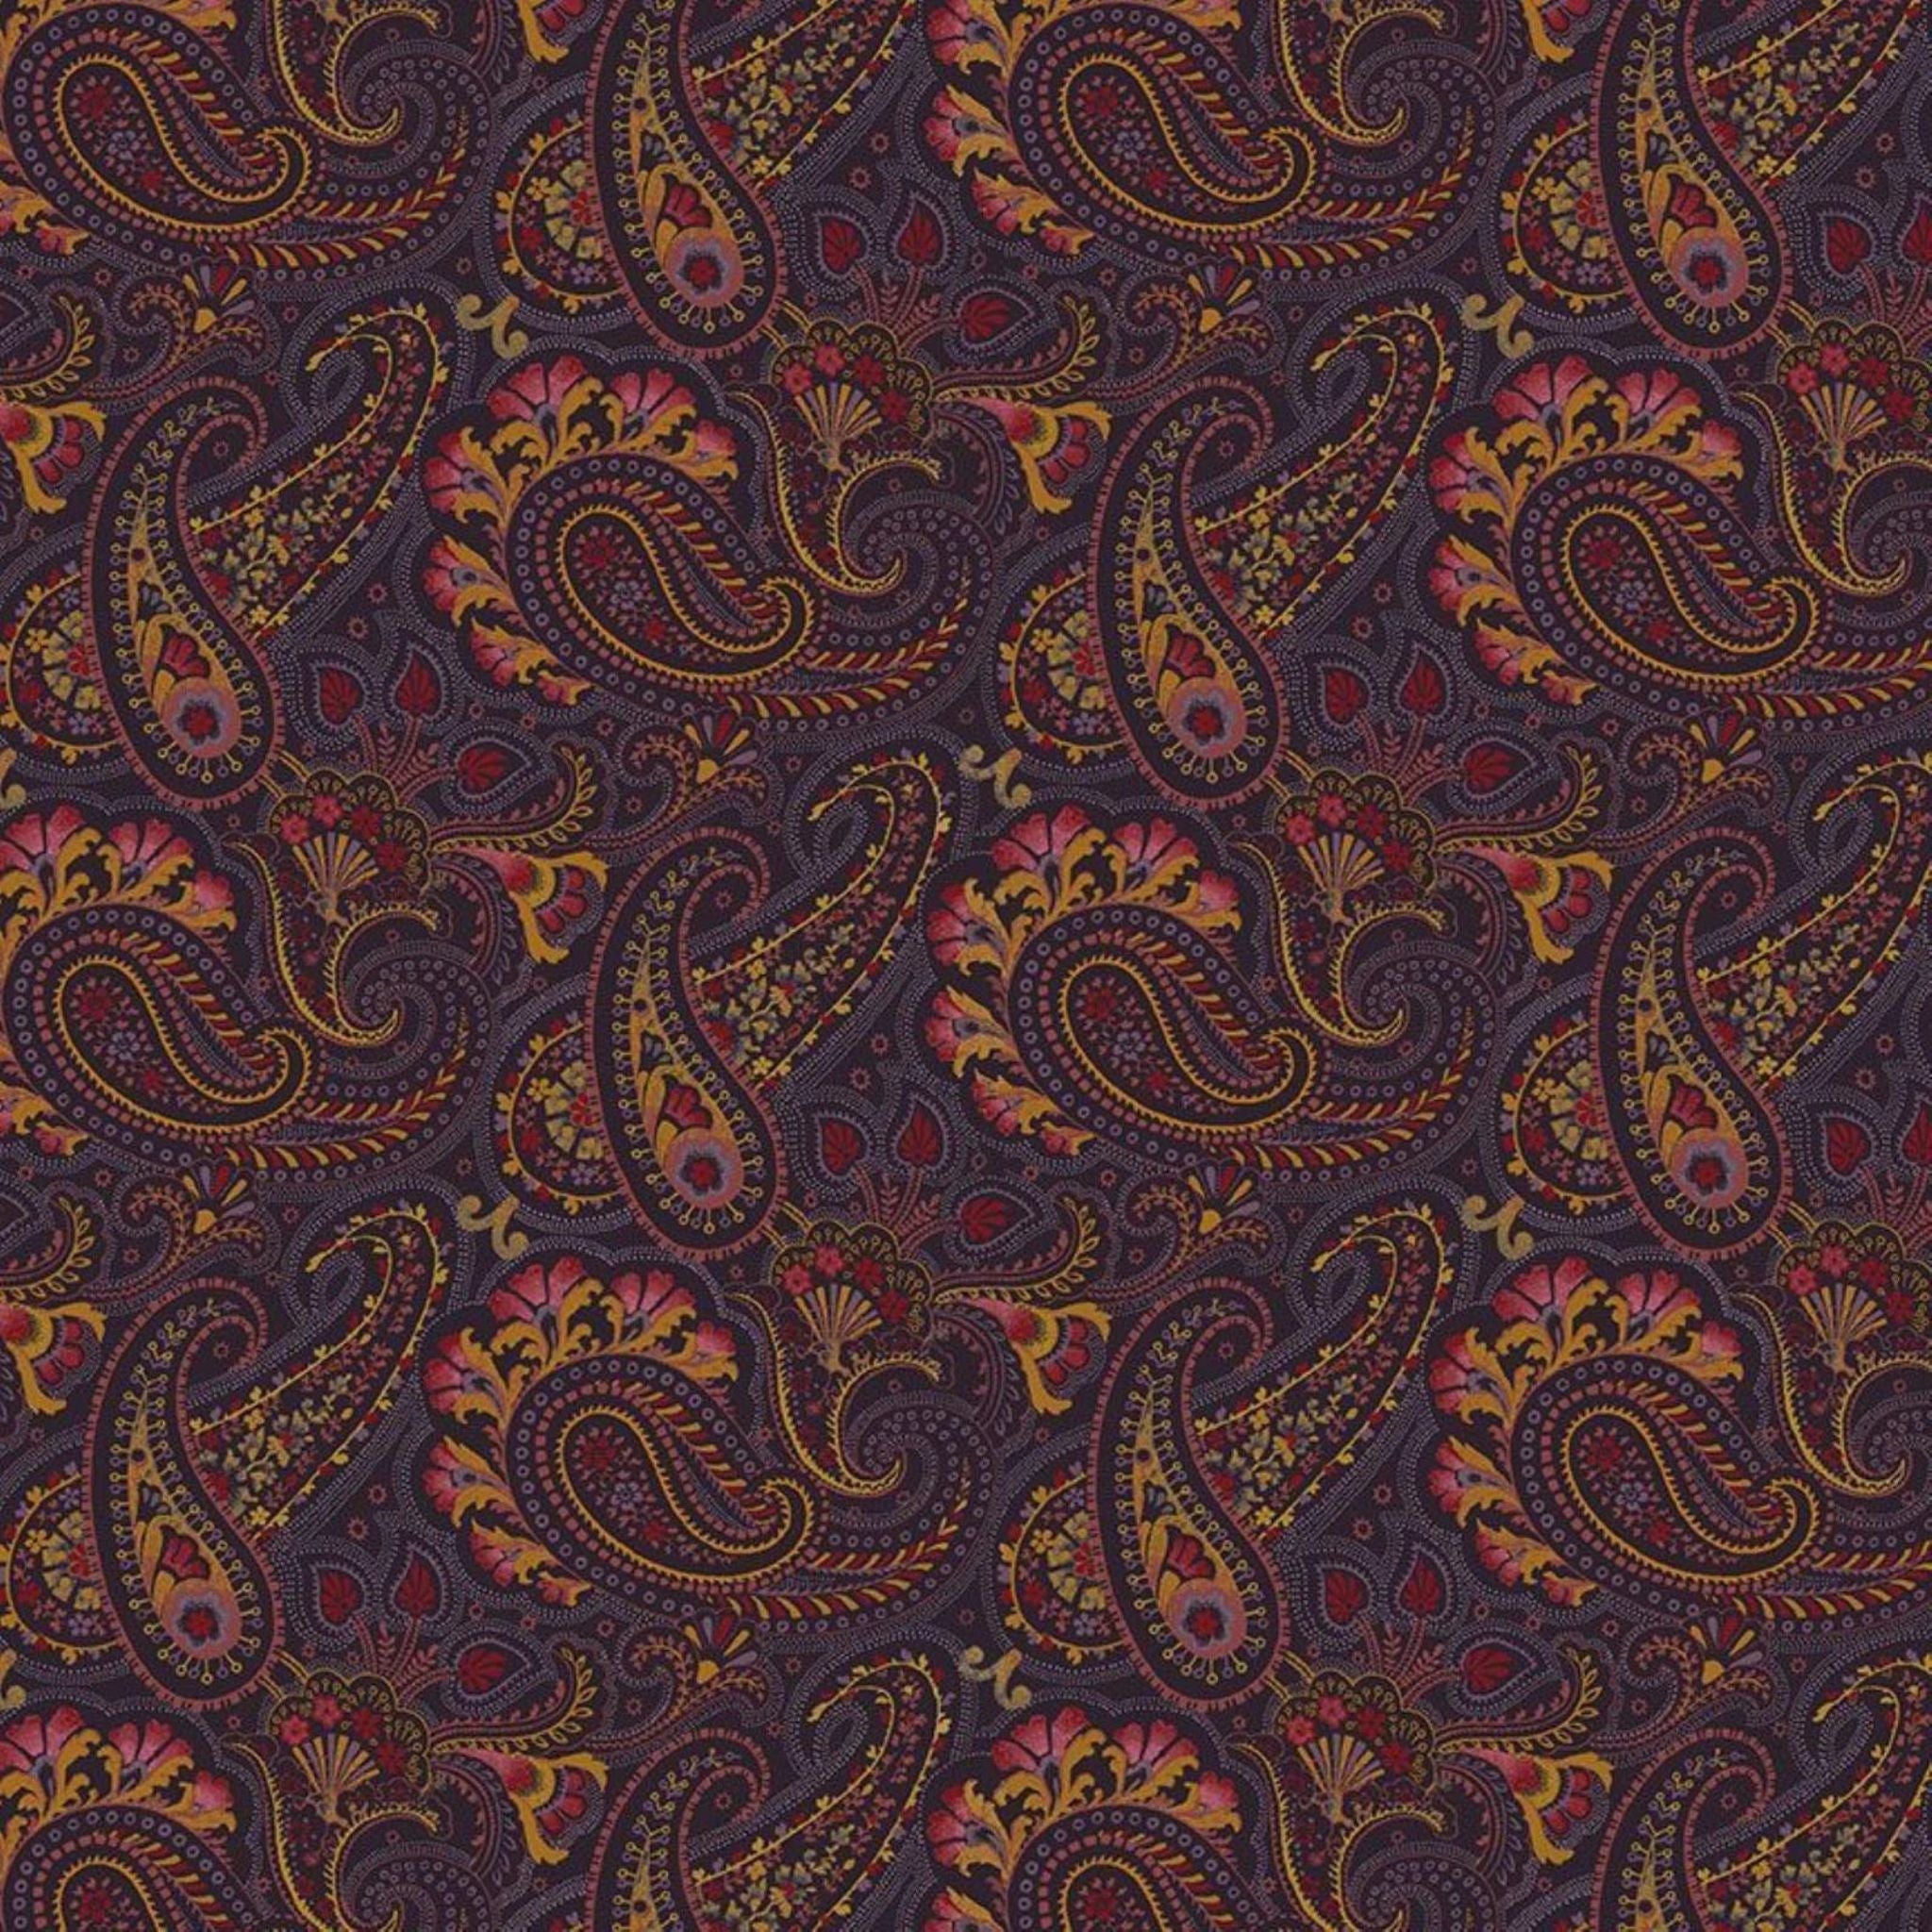 burgundy fabric with brown paisley pattern - Laurel by Timeless Treasures